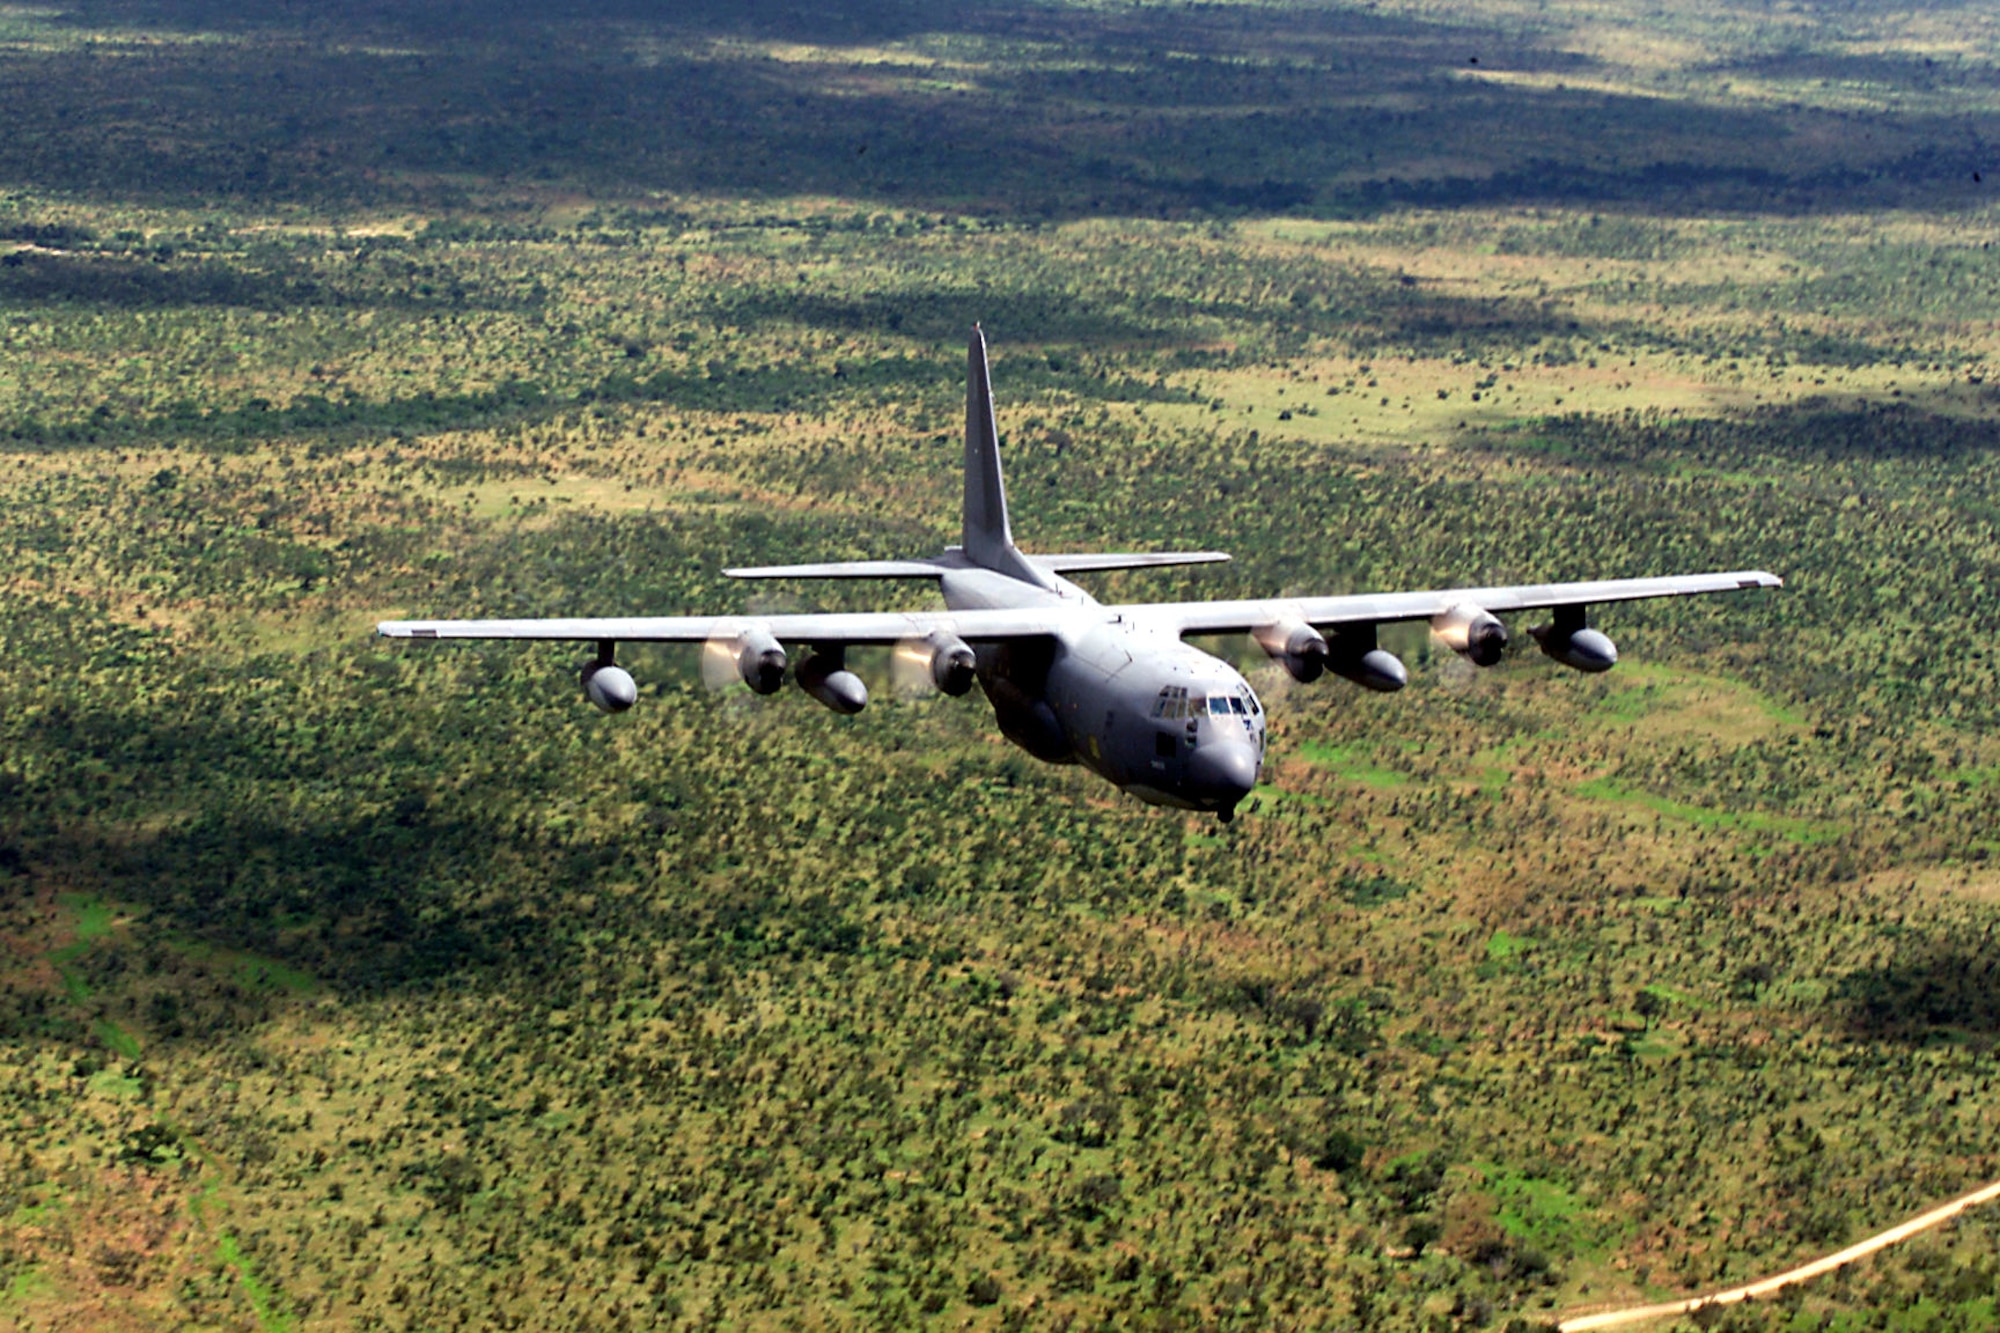 An MC-130 participates in Mozambique flood relief effort in March 2000 during Operation Atlas Response. Relief operations focused on providing food, water and medical supplies to more than 650,000 people in Africa.  Joint Task Force personnel mapped "hot spots" where people were at risk. They also used infrared cameras to identify road and rail breaks that could be repaired quickly to expedite aid delivery instead of relying almost solely on airlift. (courtesy photo)